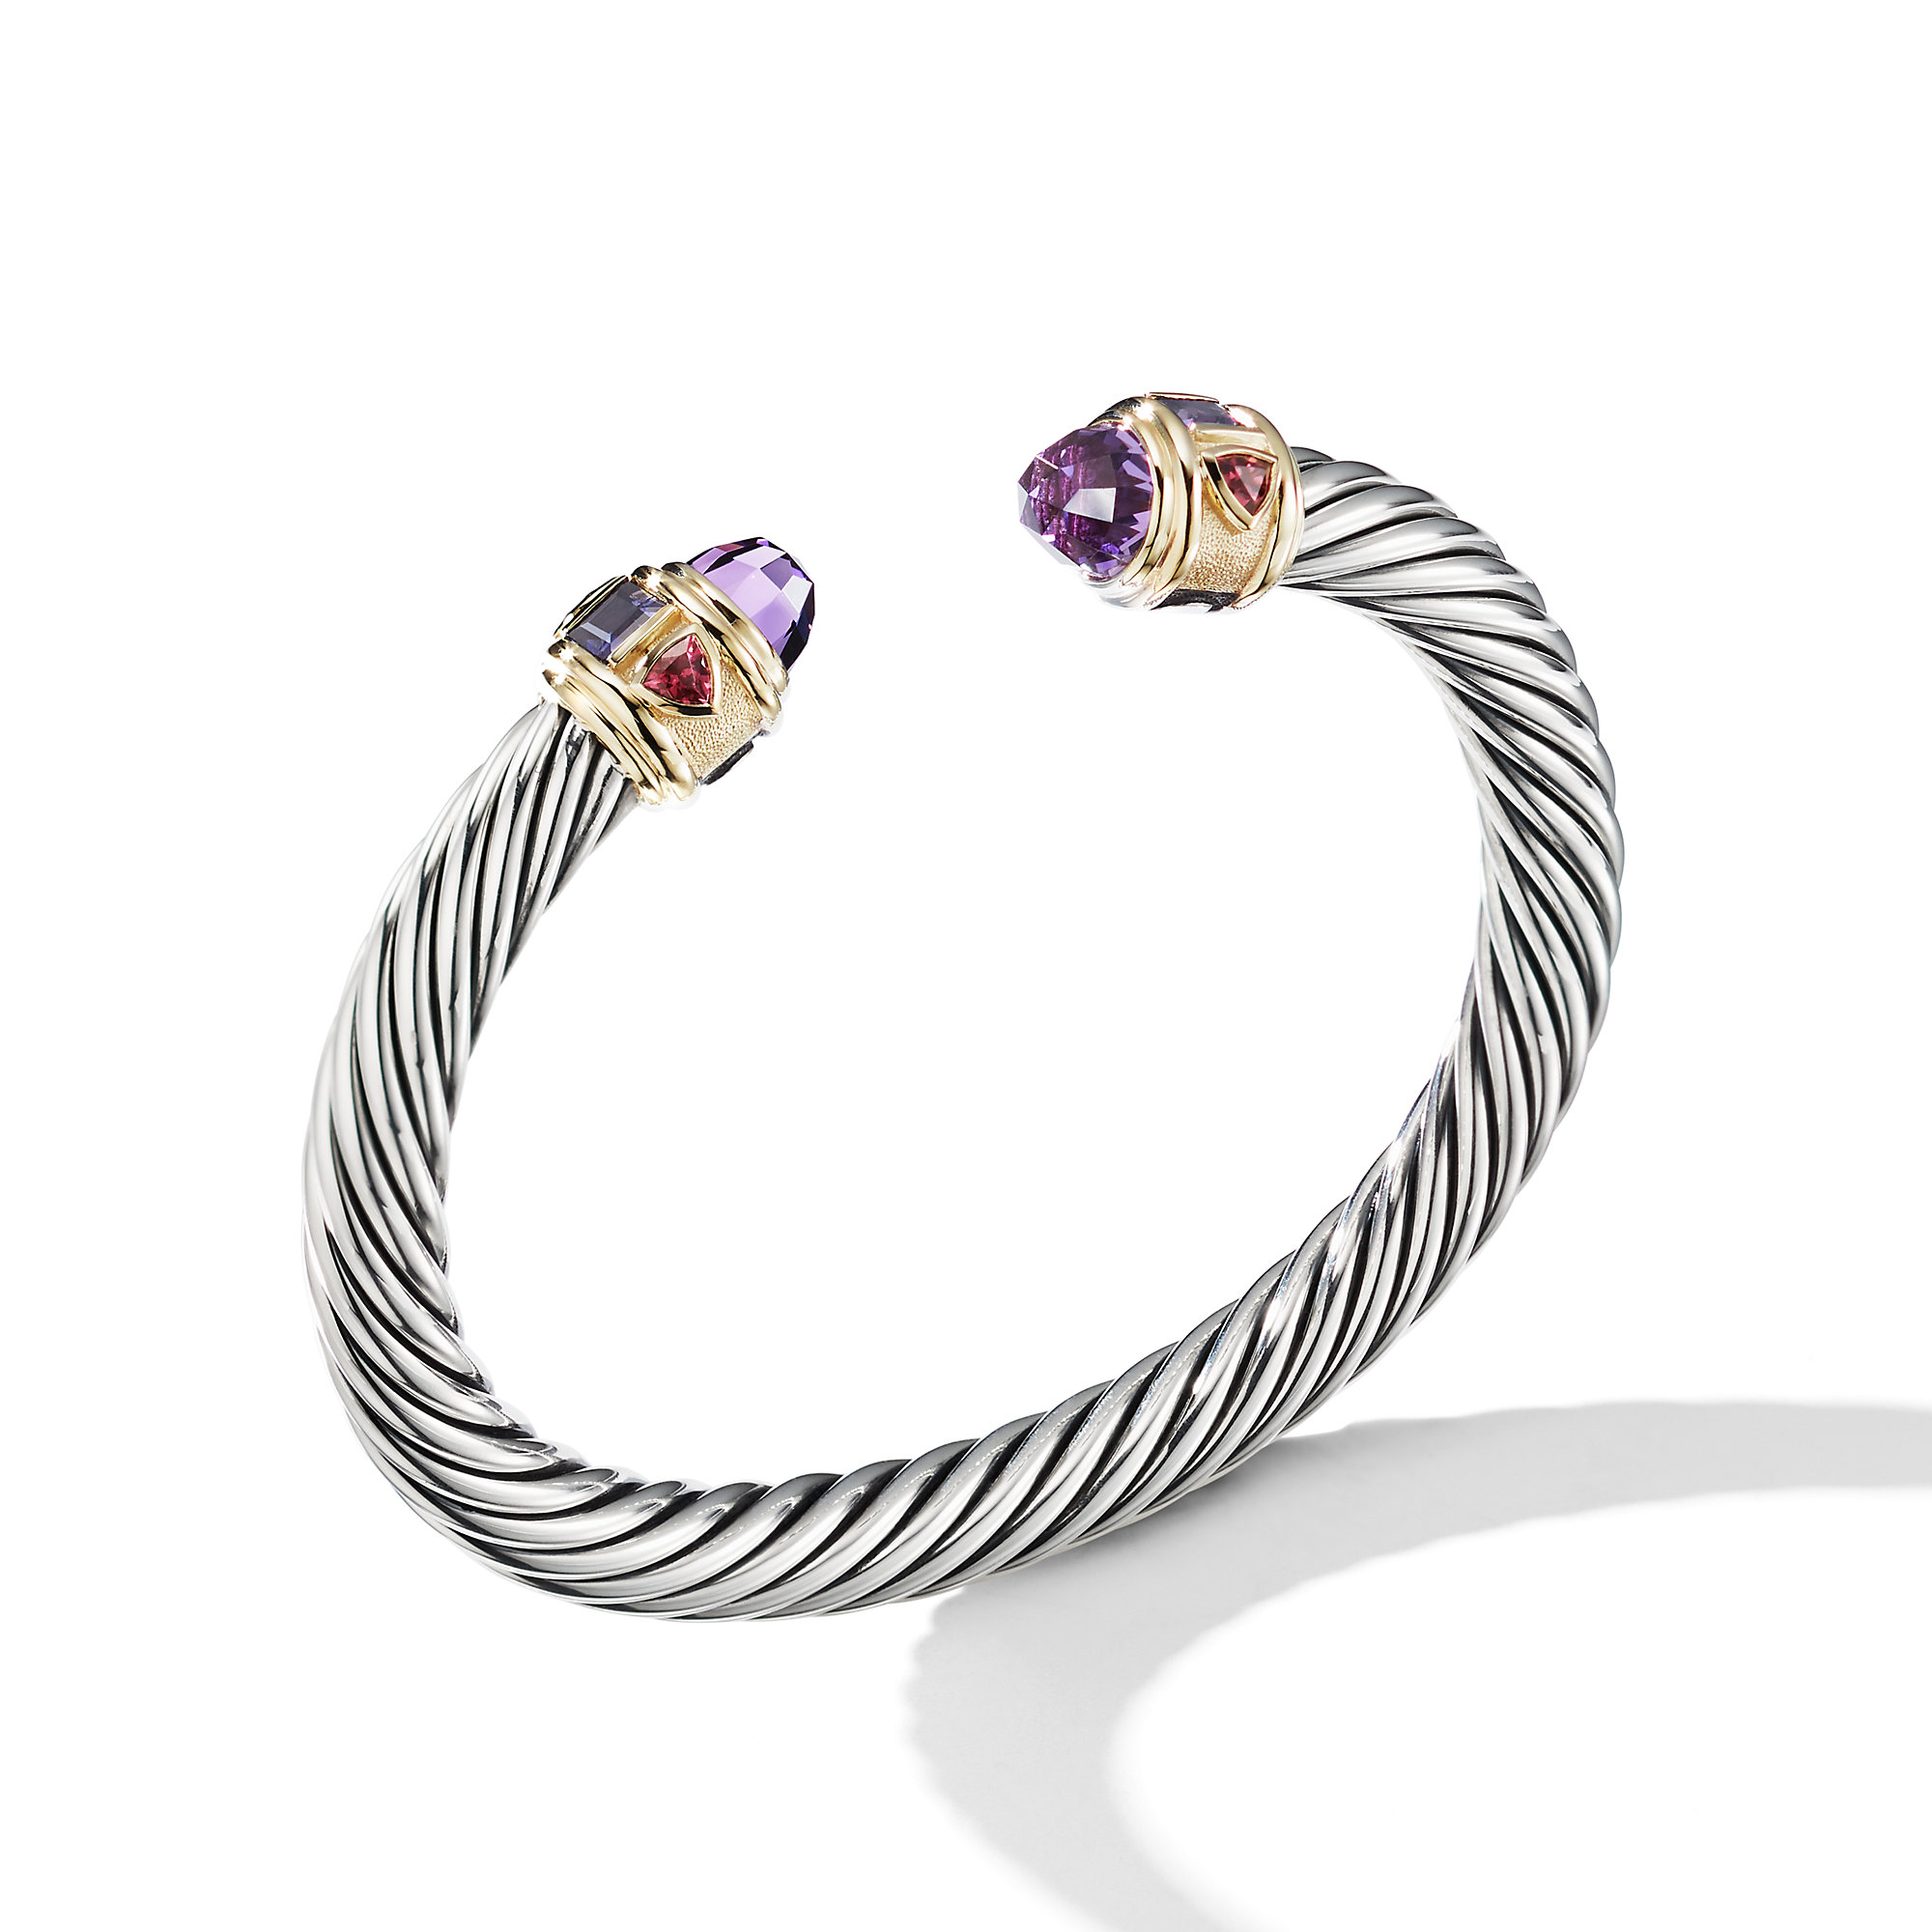 Renaissance Bracelet with Amethyst and 14K Yellow Gold